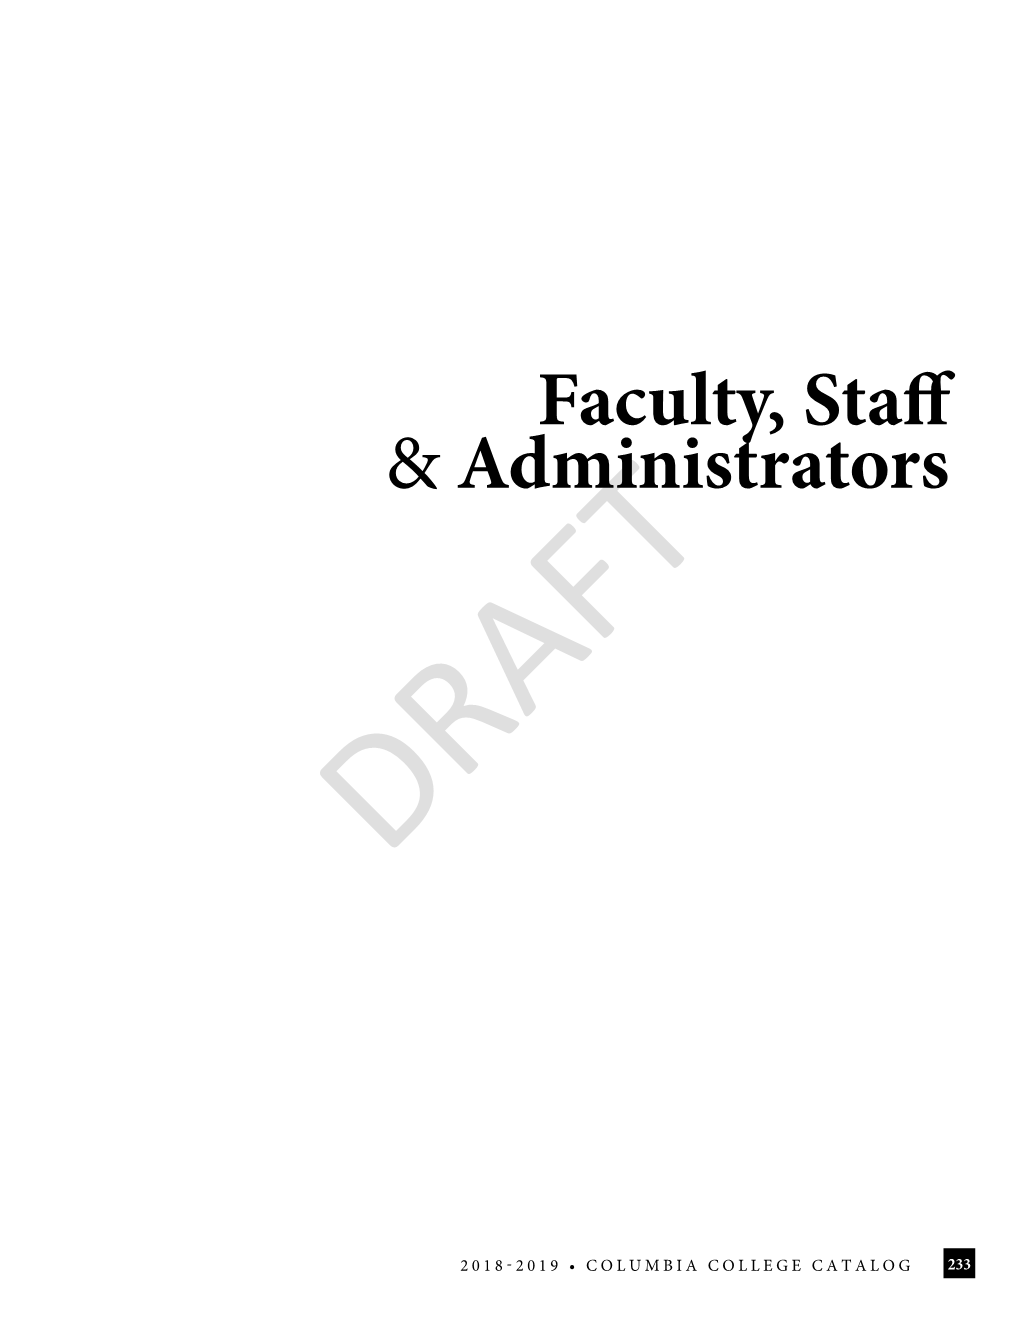 Faculty, Staff & Administrators